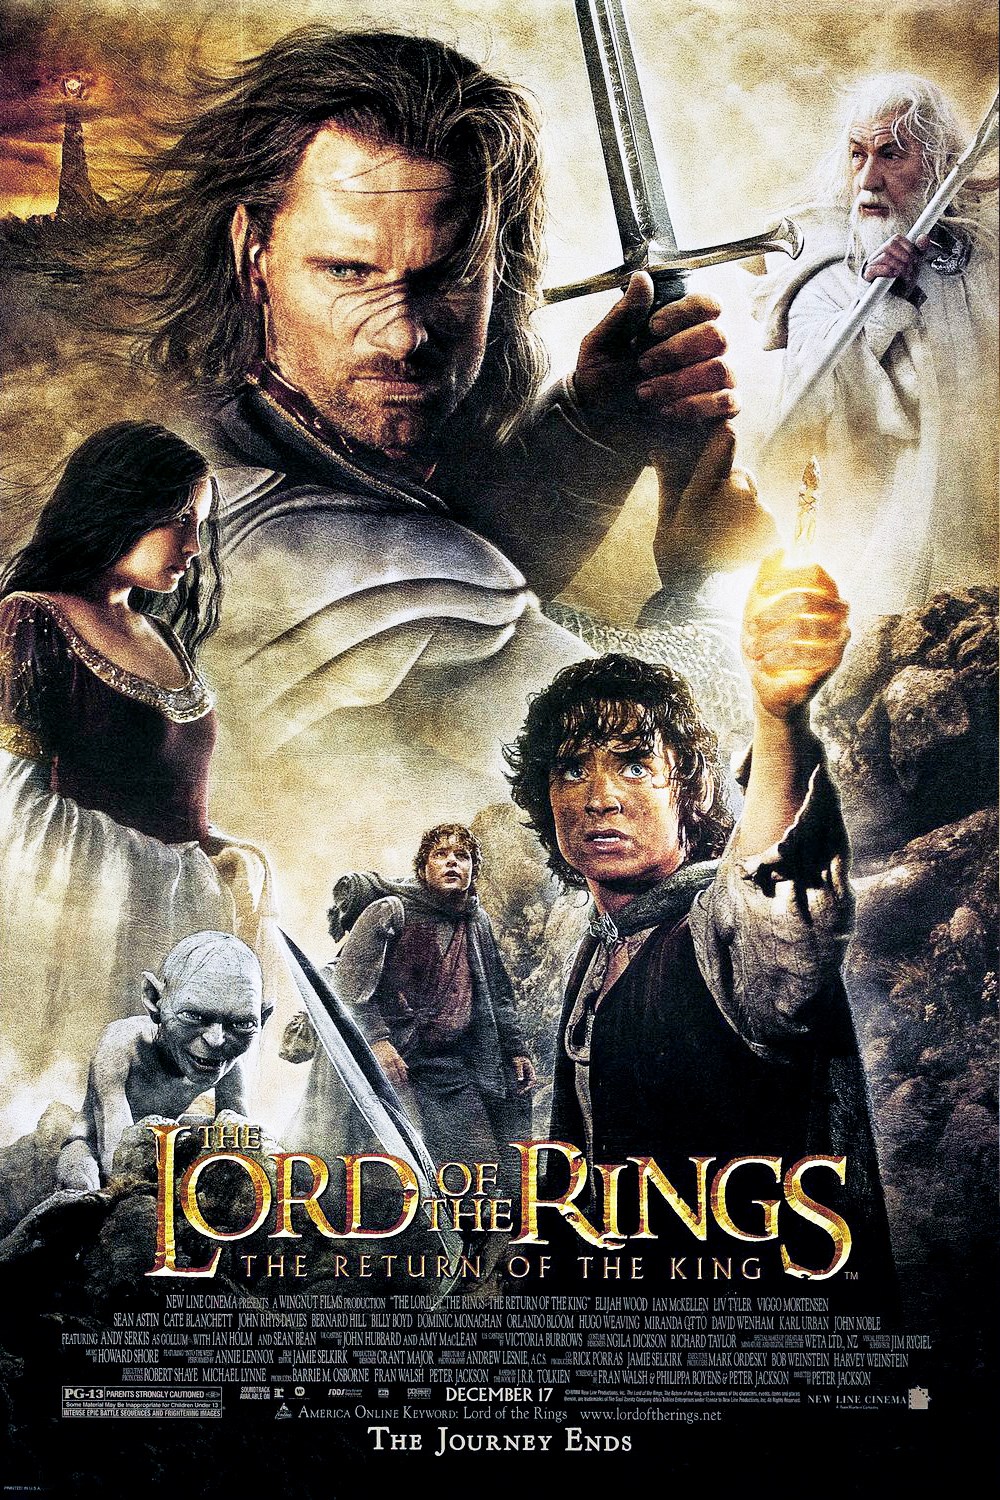 The.Lord.of.the.Rings.3.The.Return.of.the.King.1080p.720p.mkv